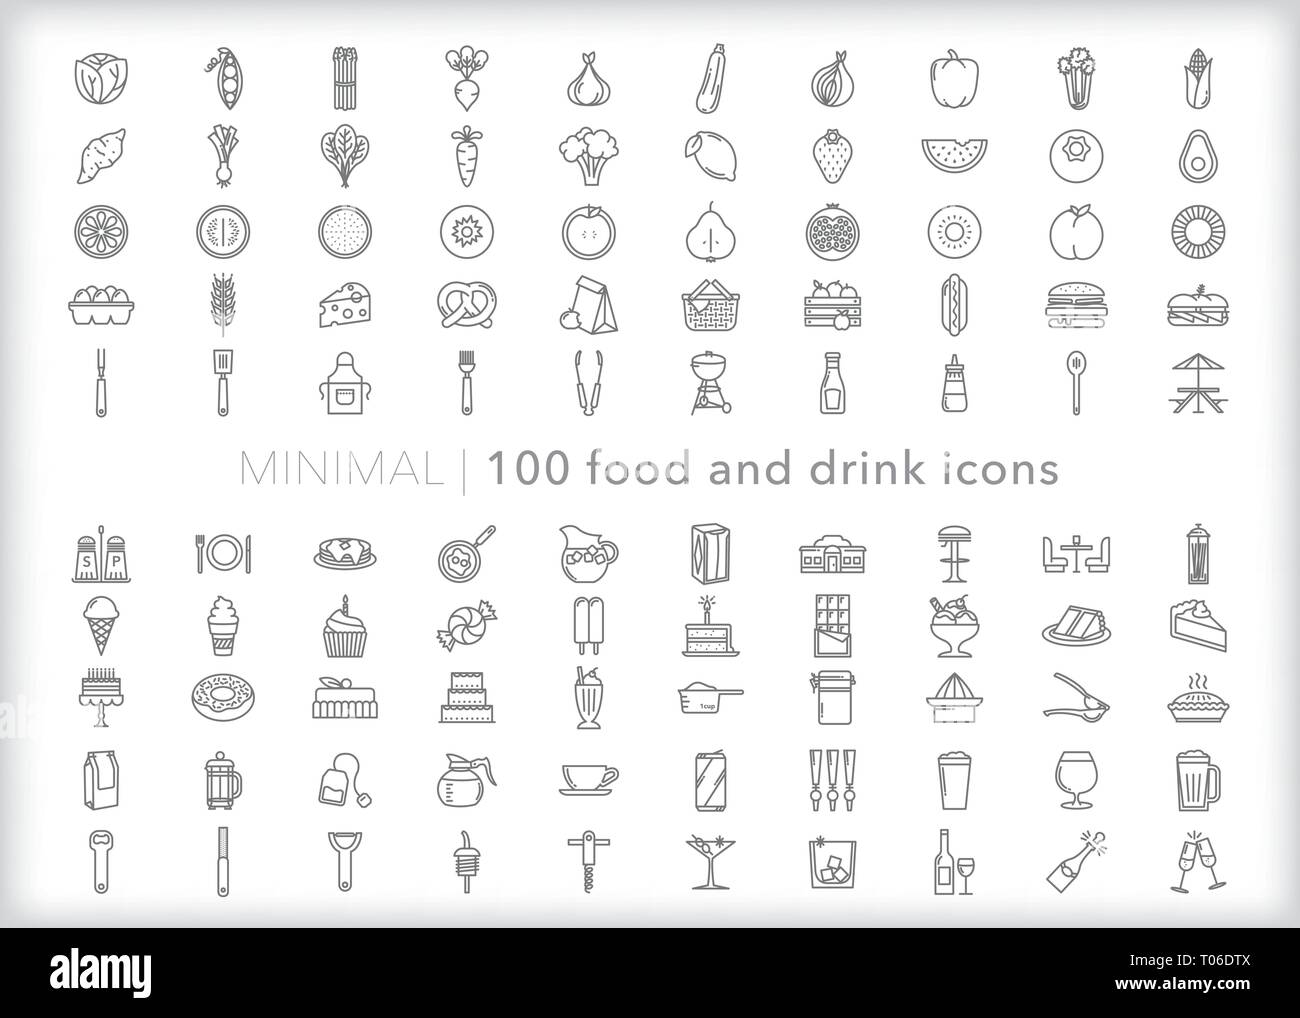 Set of 100 food and drink line icons of for breakfast, lunch, dinner and snacks Stock Vector